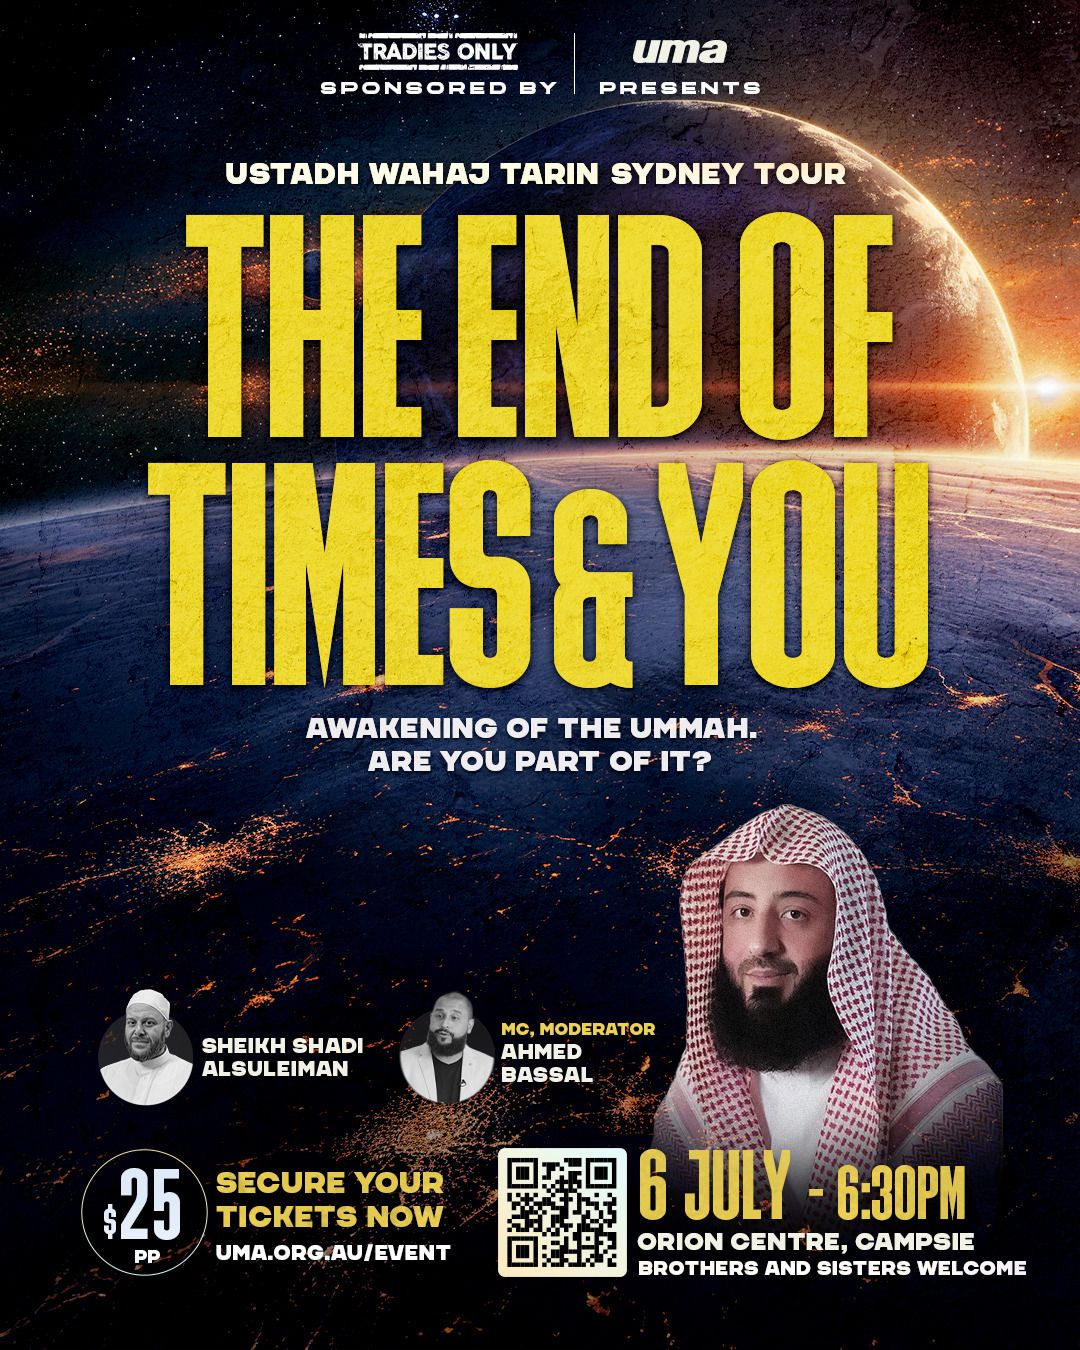 SPECIAL Event! The End of Times & You - Ustadh Wahaj Tarin